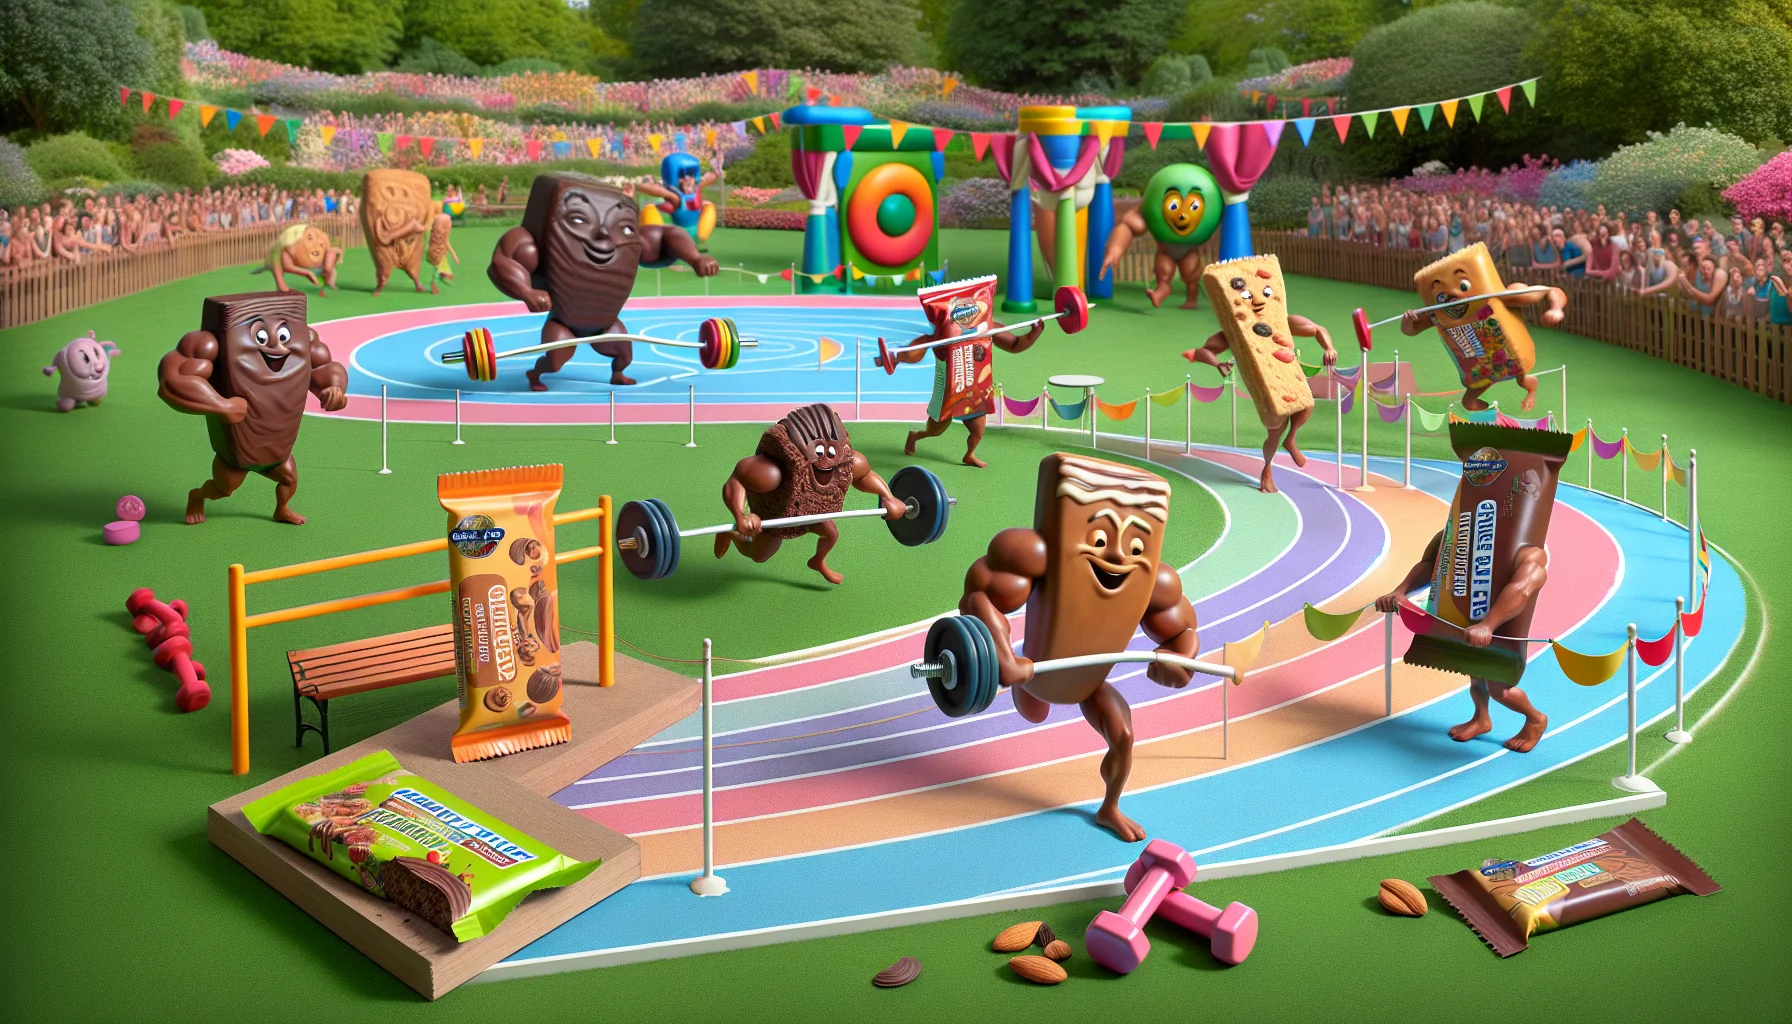 Imagine an amusing scenario that takes place in a colorful outdoor fitness park. A variety of Garden of Life protein bars are participating in their own olympics! Each variety of bar is characterized and anthropomorphized into different athletes: the 'Chocolate Fudge' bar is a burly weightlifter, lifting dumbbells; the 'Peanut Butter Chocolate' shows its agility as a sprightly sprinter; and the 'Vanilla Almond' bar elegantly performs rhythmic gymnastics with ribbons. Across the park, spectators of all descents and genders eagerly cheer them on. This whimsical scene highlights the added energy and performance these bars can bring to one's routine.